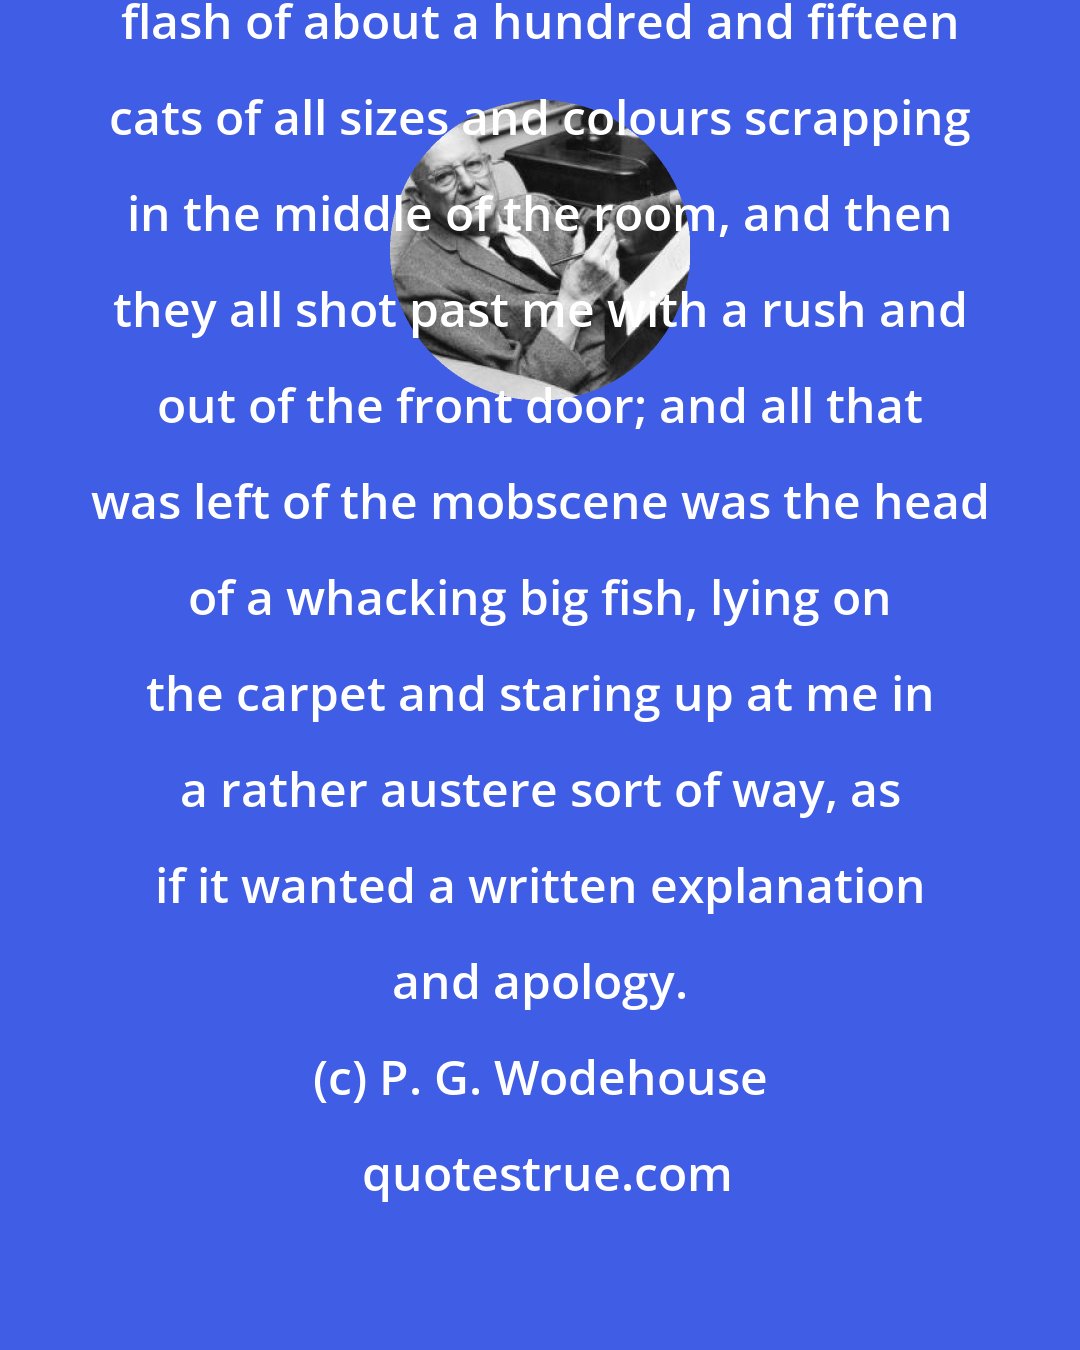 P. G. Wodehouse: I flung open the door. I got a momentary flash of about a hundred and fifteen cats of all sizes and colours scrapping in the middle of the room, and then they all shot past me with a rush and out of the front door; and all that was left of the mobscene was the head of a whacking big fish, lying on the carpet and staring up at me in a rather austere sort of way, as if it wanted a written explanation and apology.